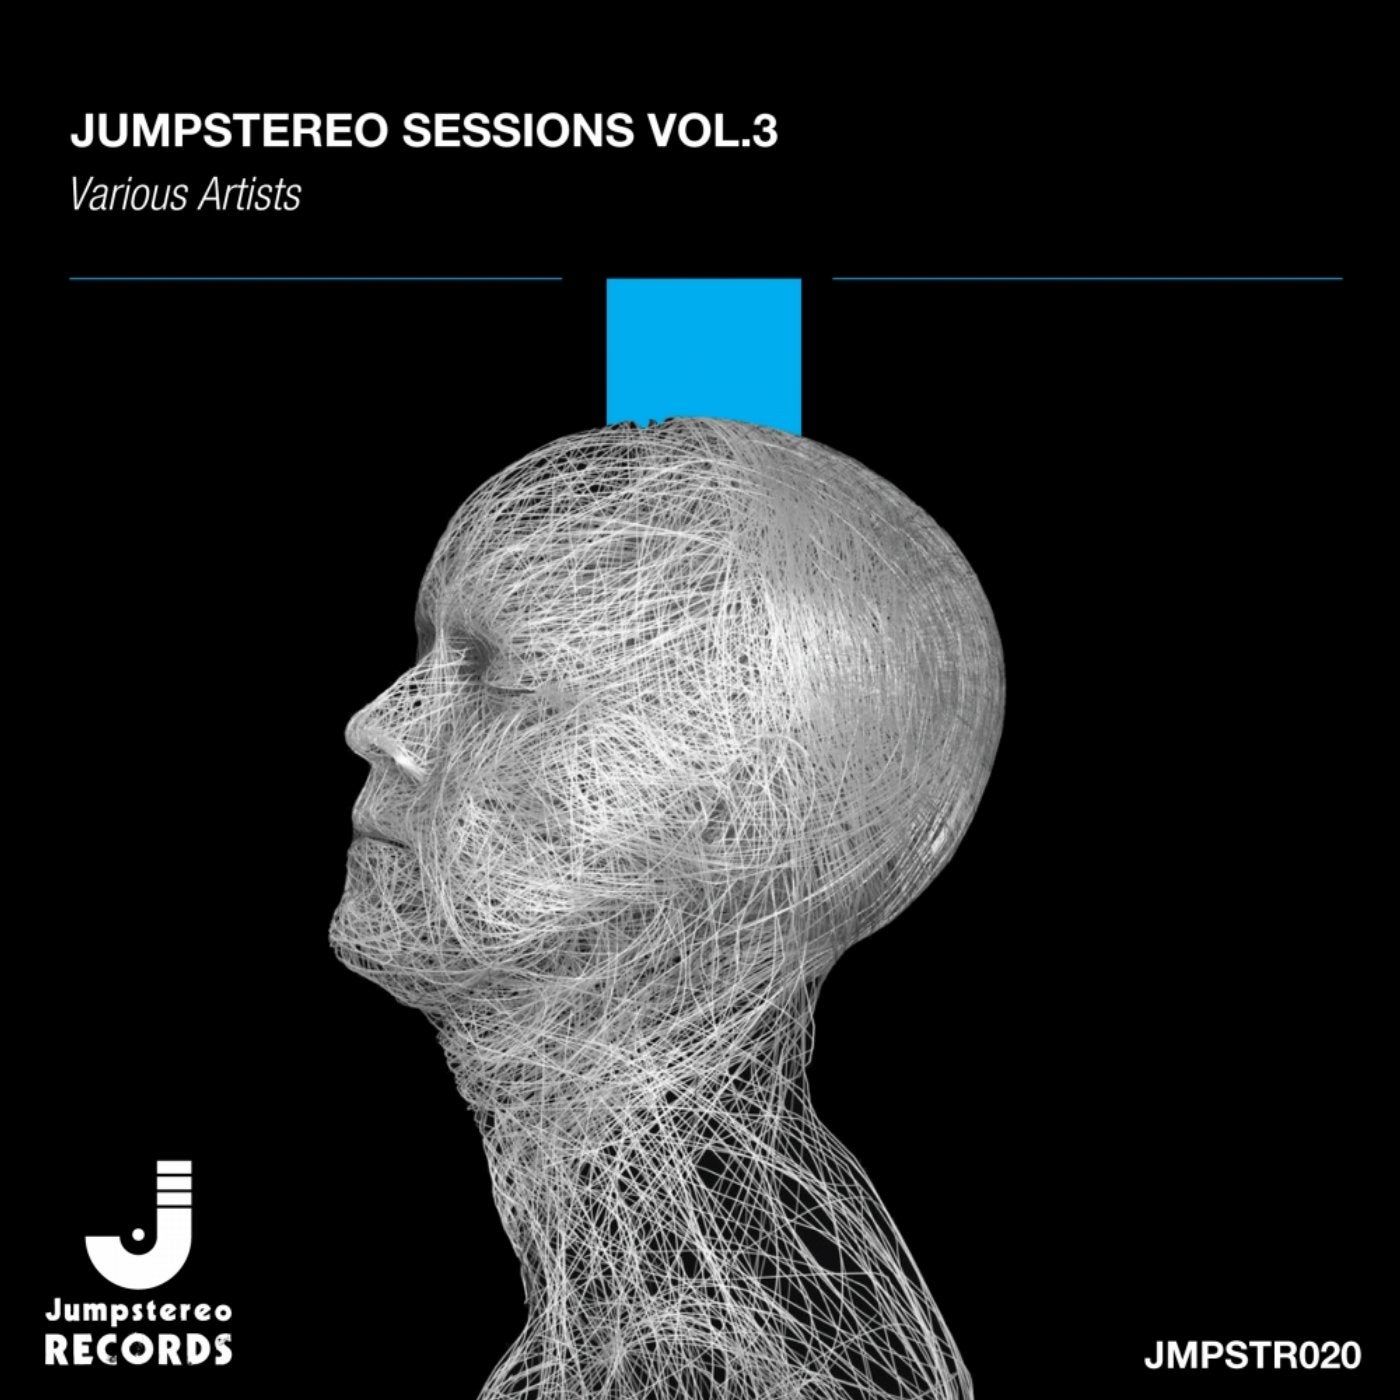 Jumpstereo Sessions, Vol. 3